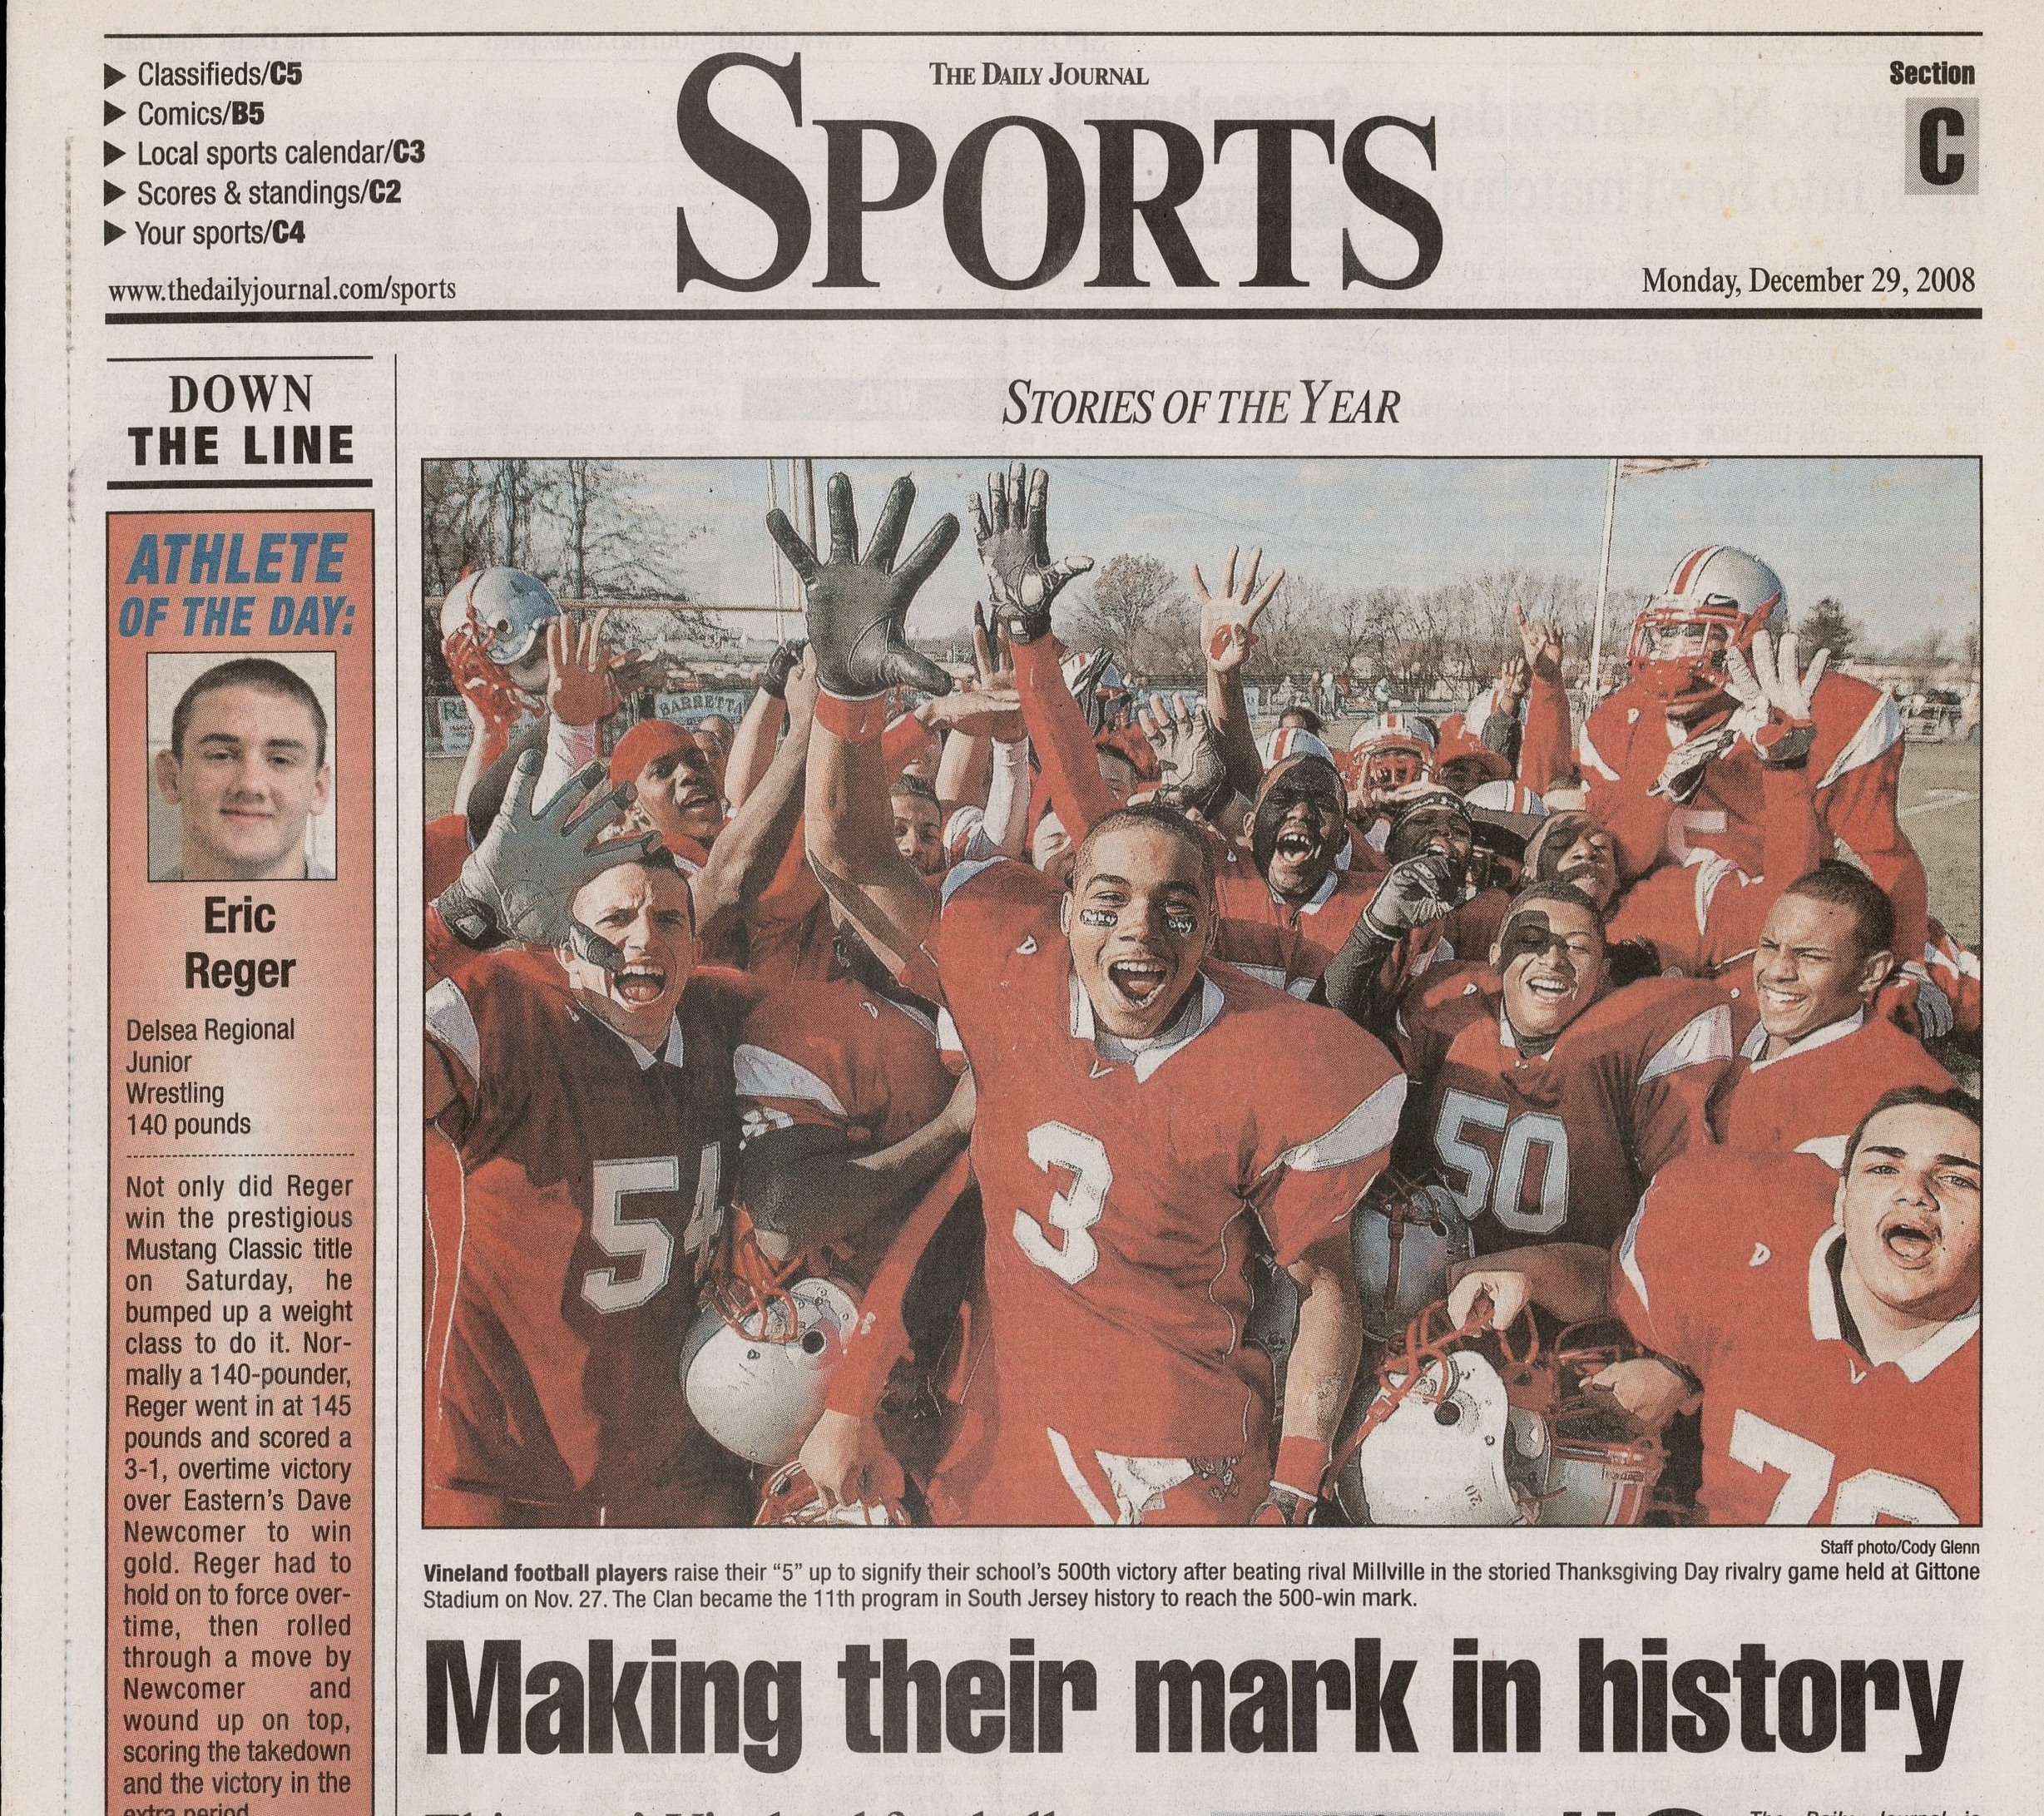  Vineland High School Football celebrates their 500th win against rival Millville on Thanksgiving 2008 /  The Daily Journal  